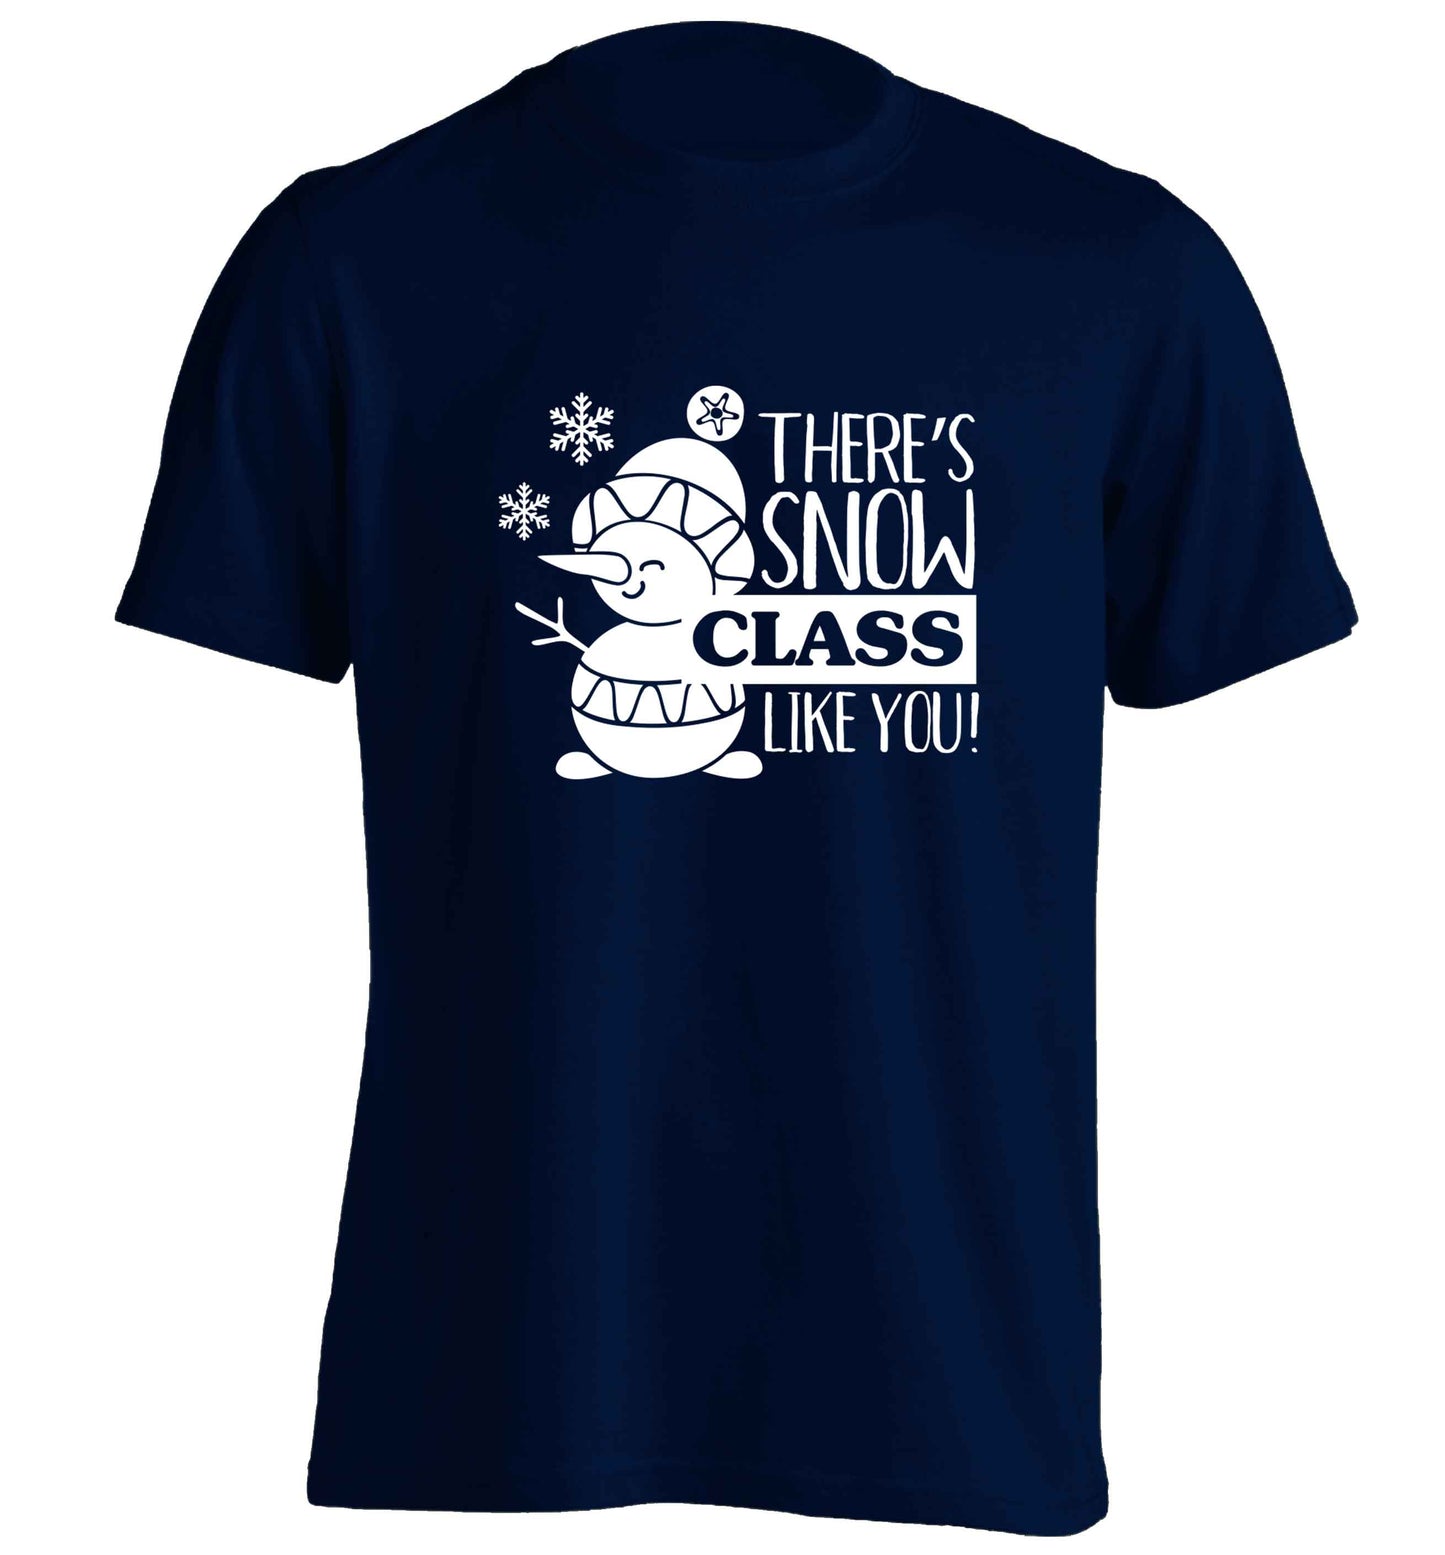 There's snow class like you adults unisex navy Tshirt 2XL